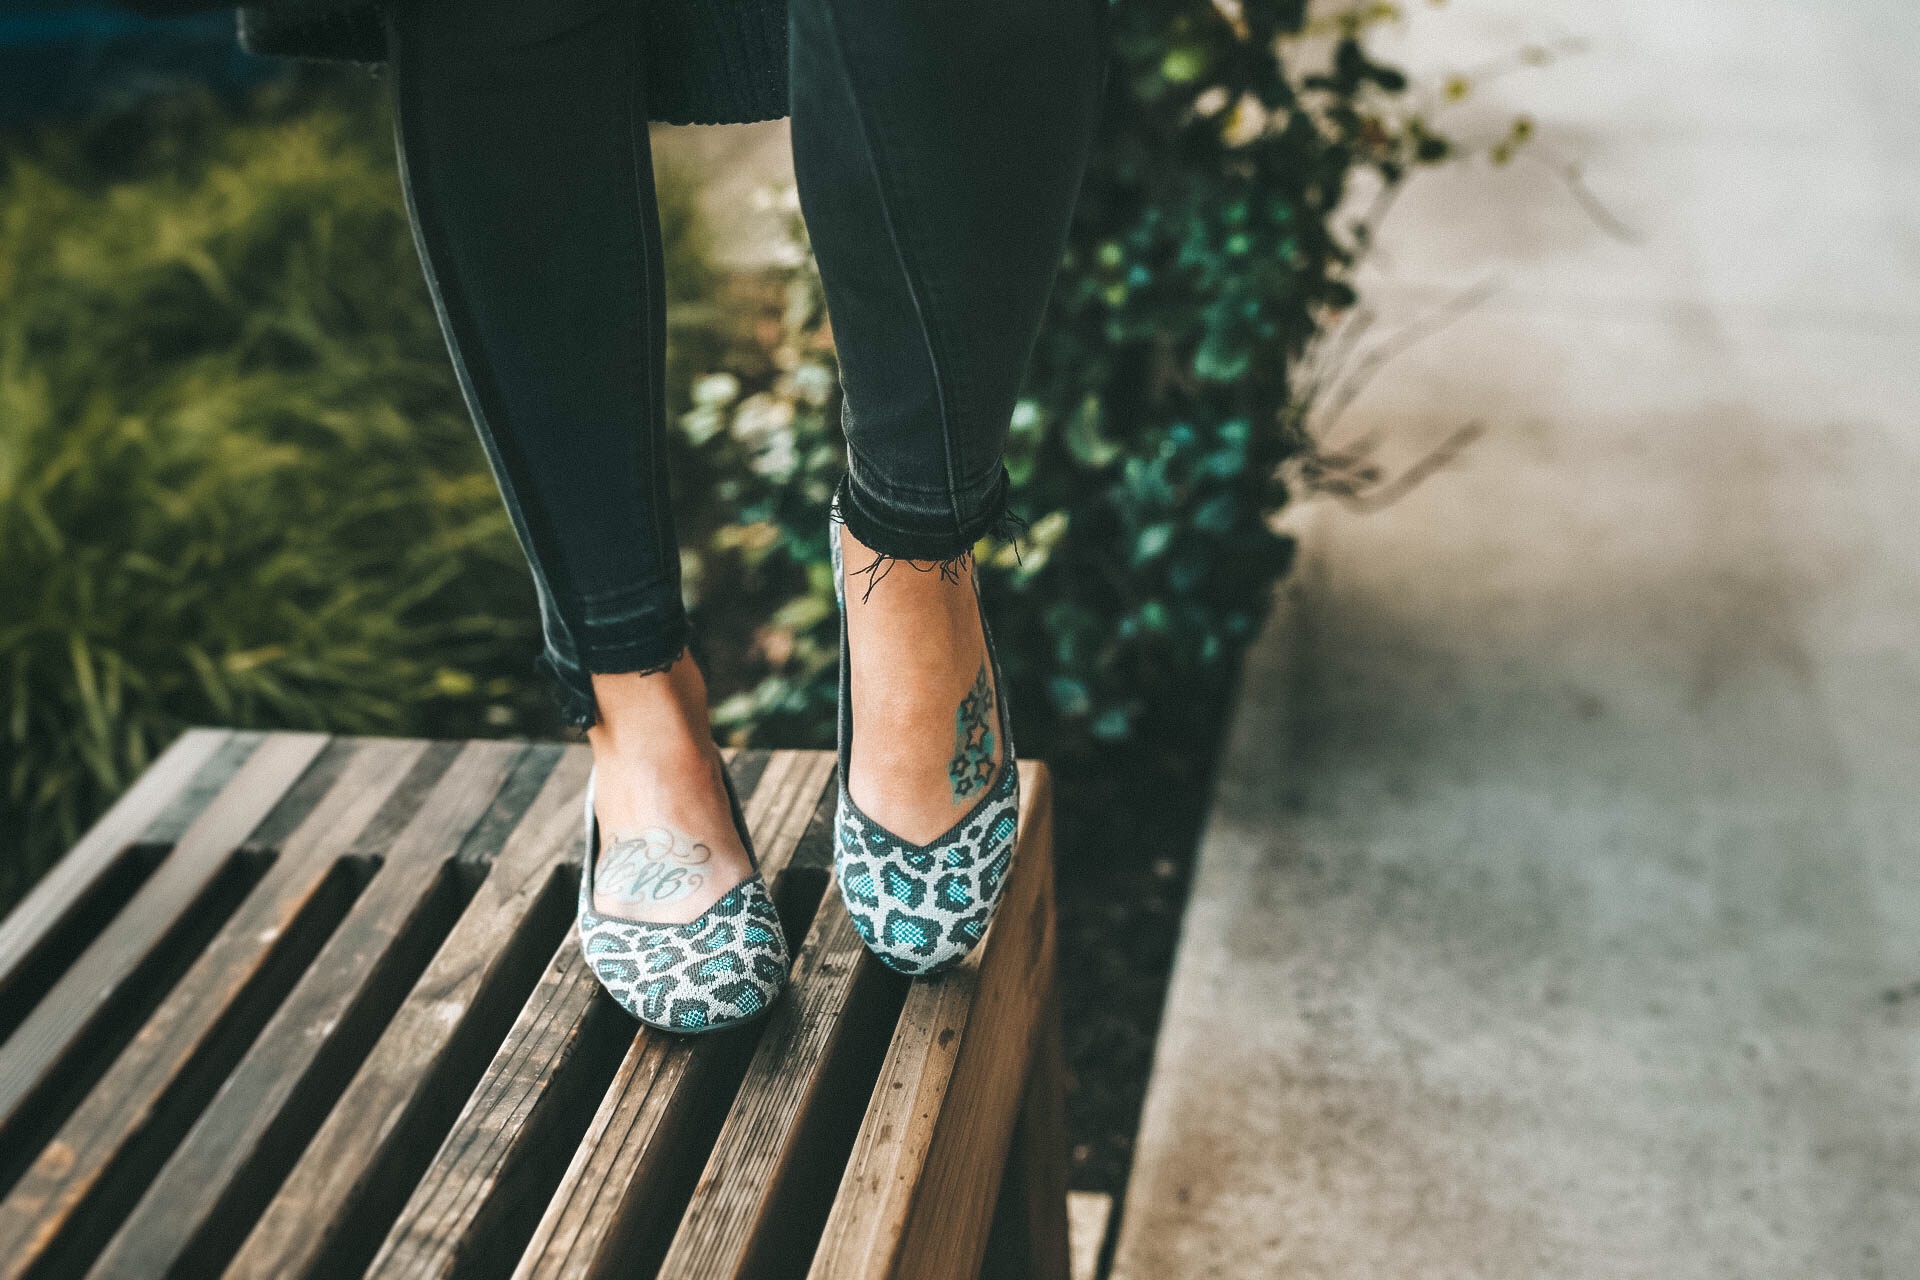 multiple ways to wear Rothy's flats and if they are worth the hype. Machine washable and made out of recycled water bottles they are a chic shoe saving the planet. | Rothy's Flats featured by popular Austin fashion blogger Dressed to Kill